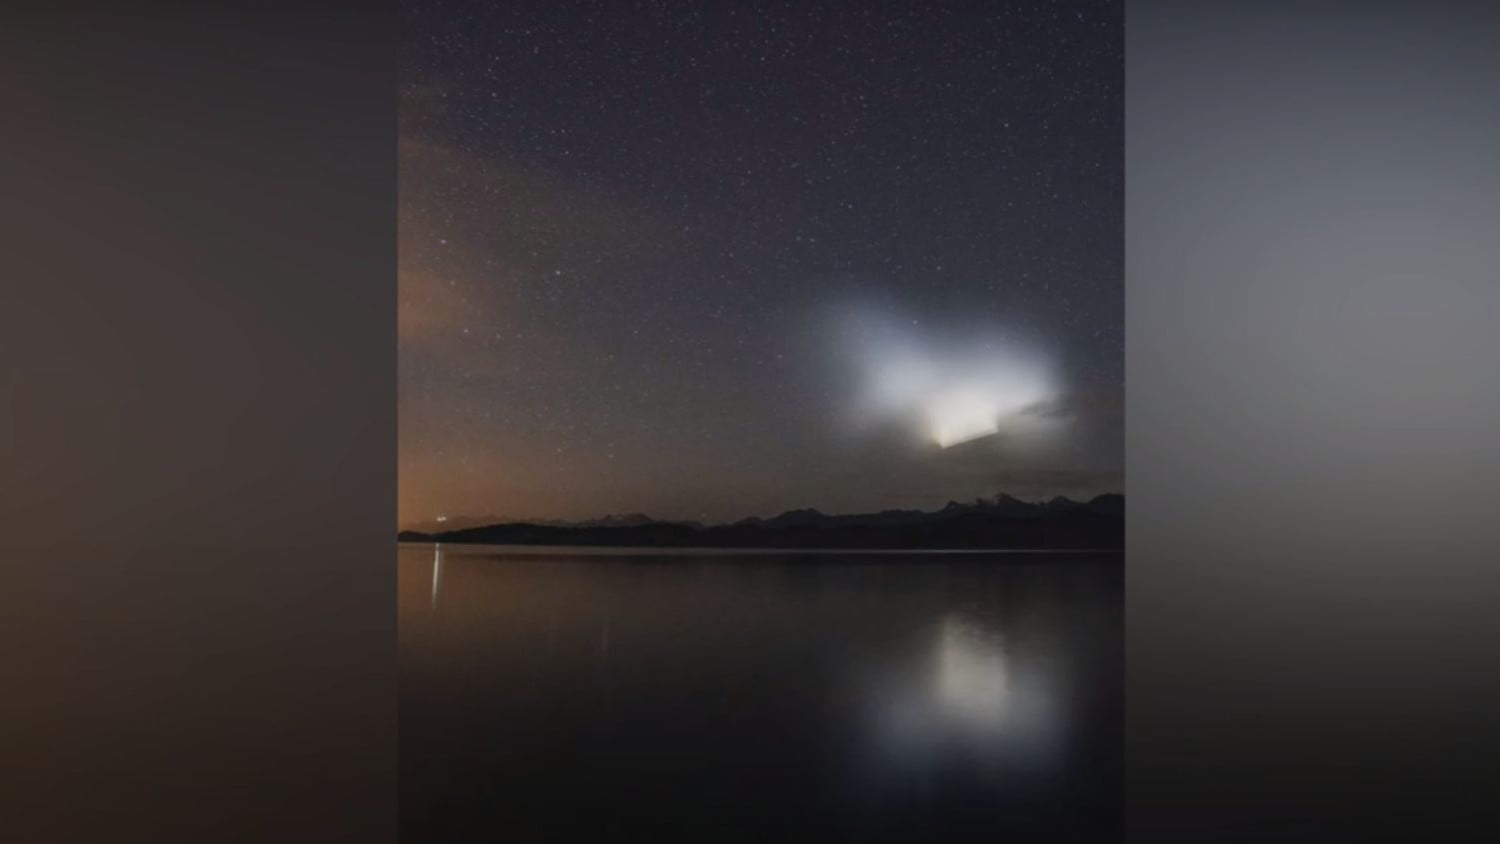 mysterious glow was filmed in the night sky over Argentina